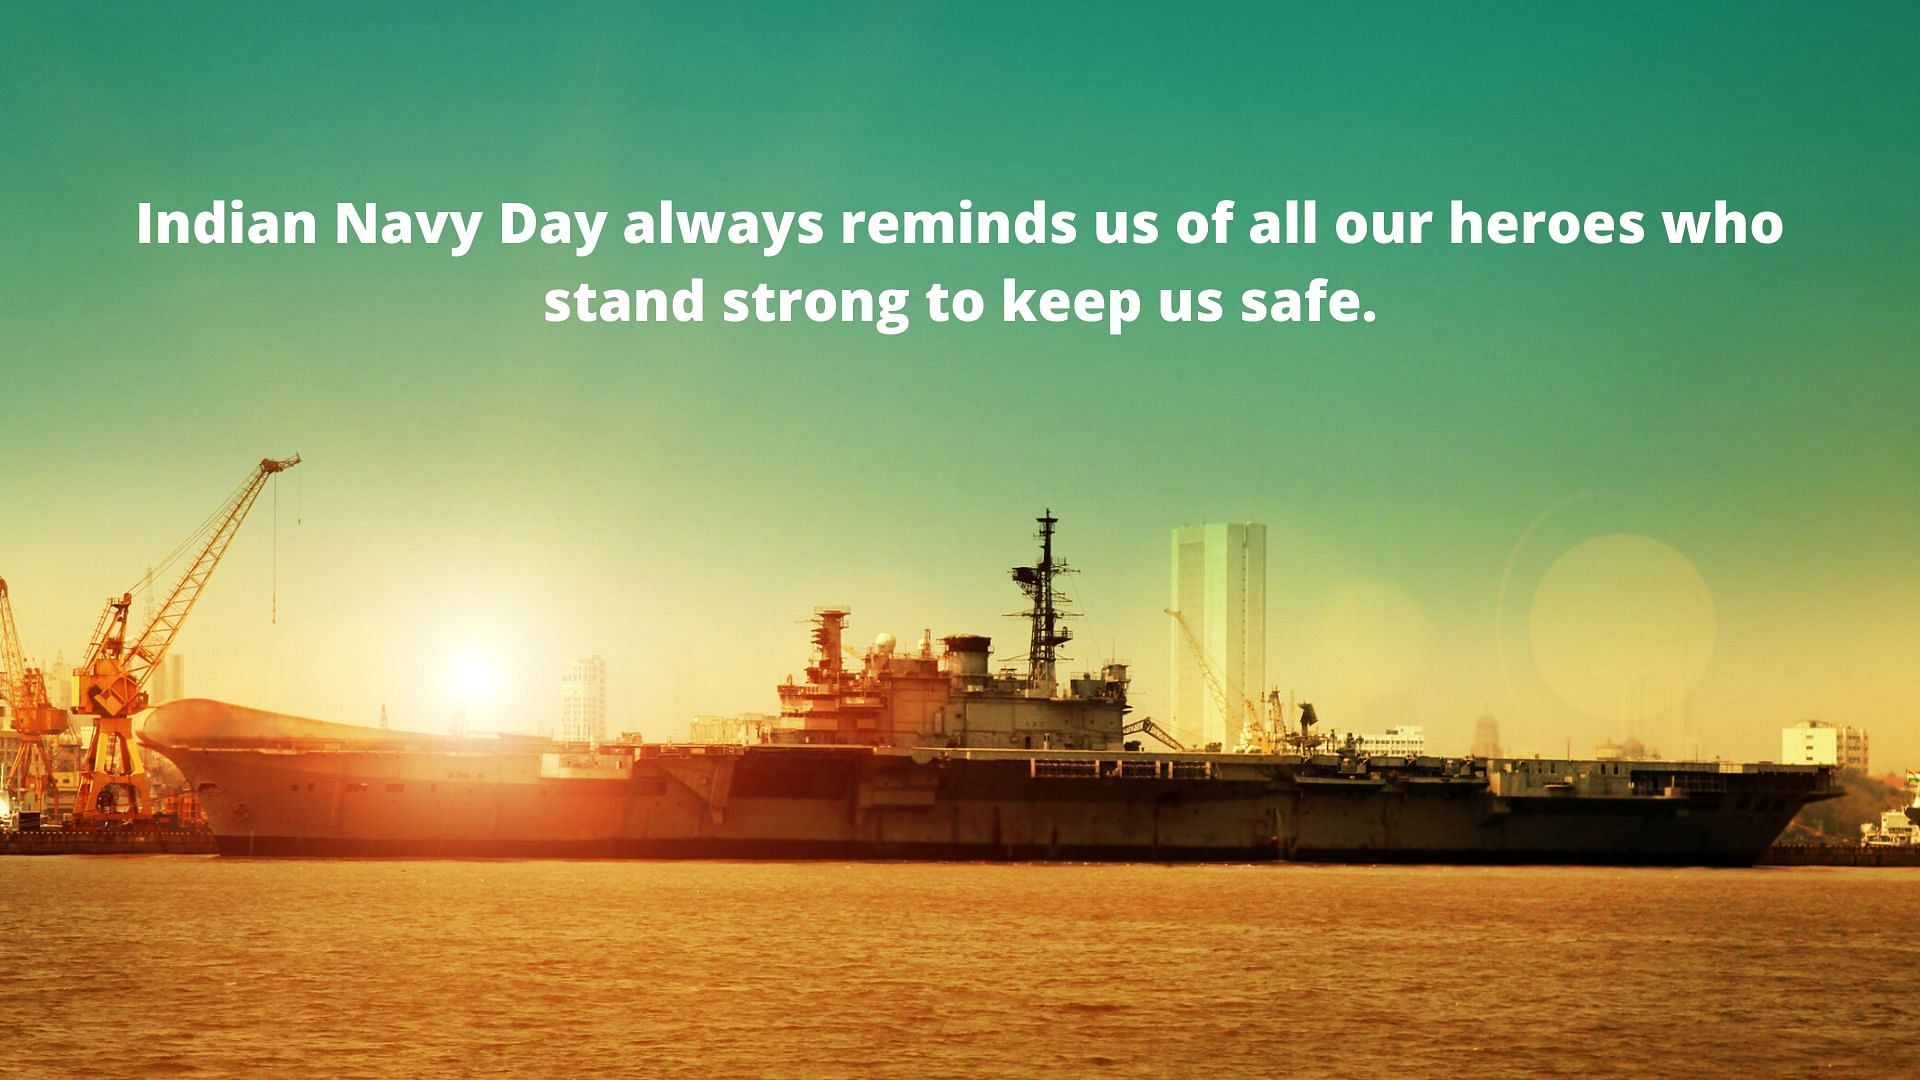 Happy Indian Navy Day 2019 Quotes, Wishes, Images, Cards and Messages ...